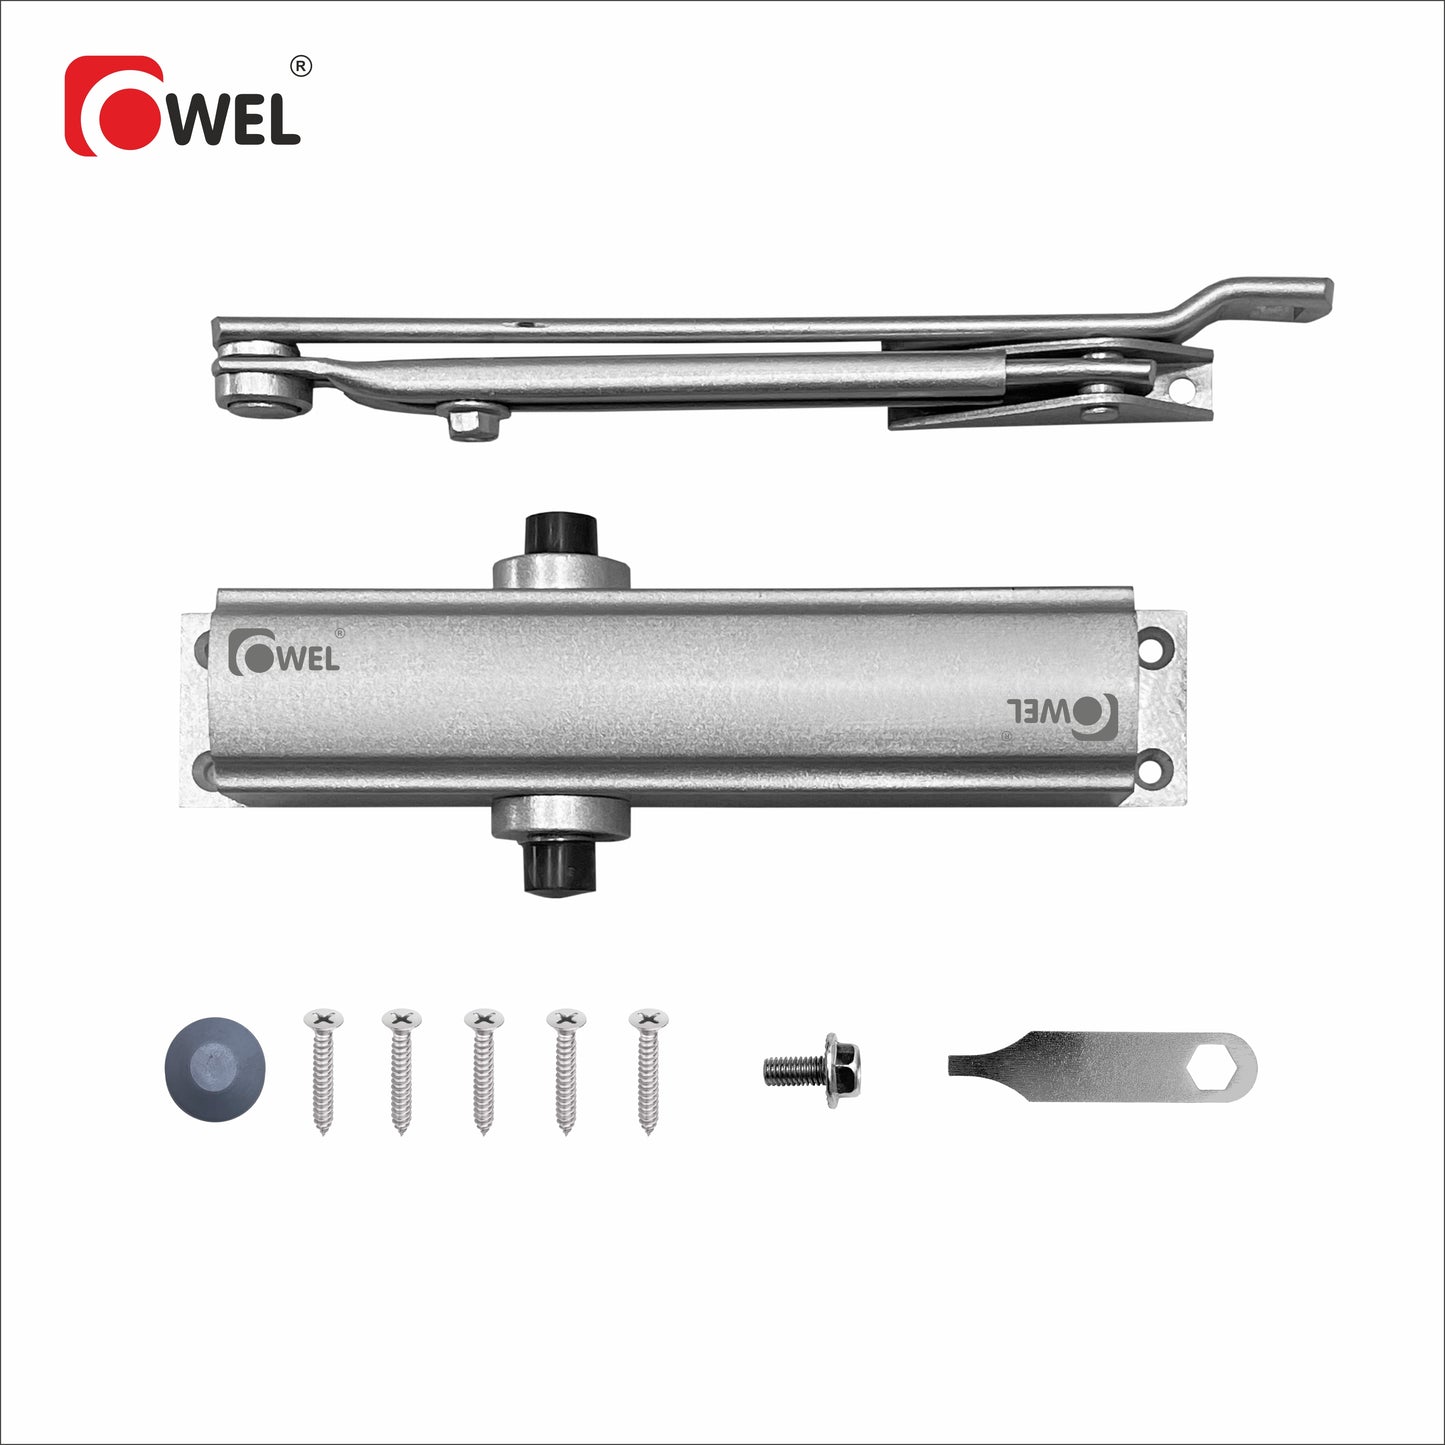 Automatic Adjustable Spring Hydraulic Auto Door Closer For Residential